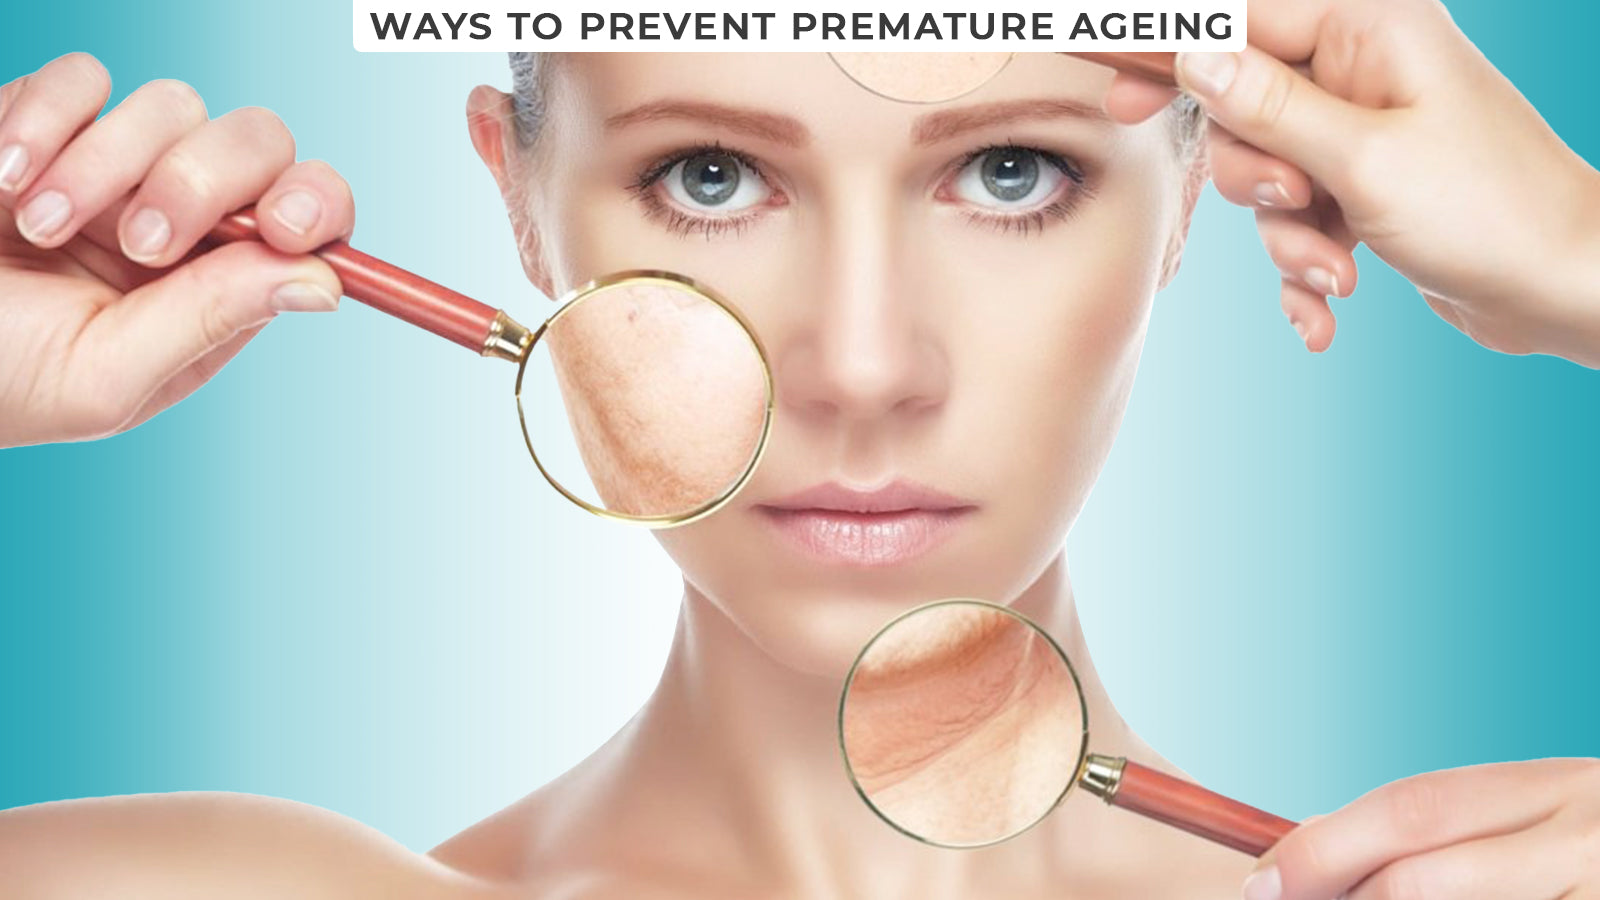 Ways to prevent premature ageing